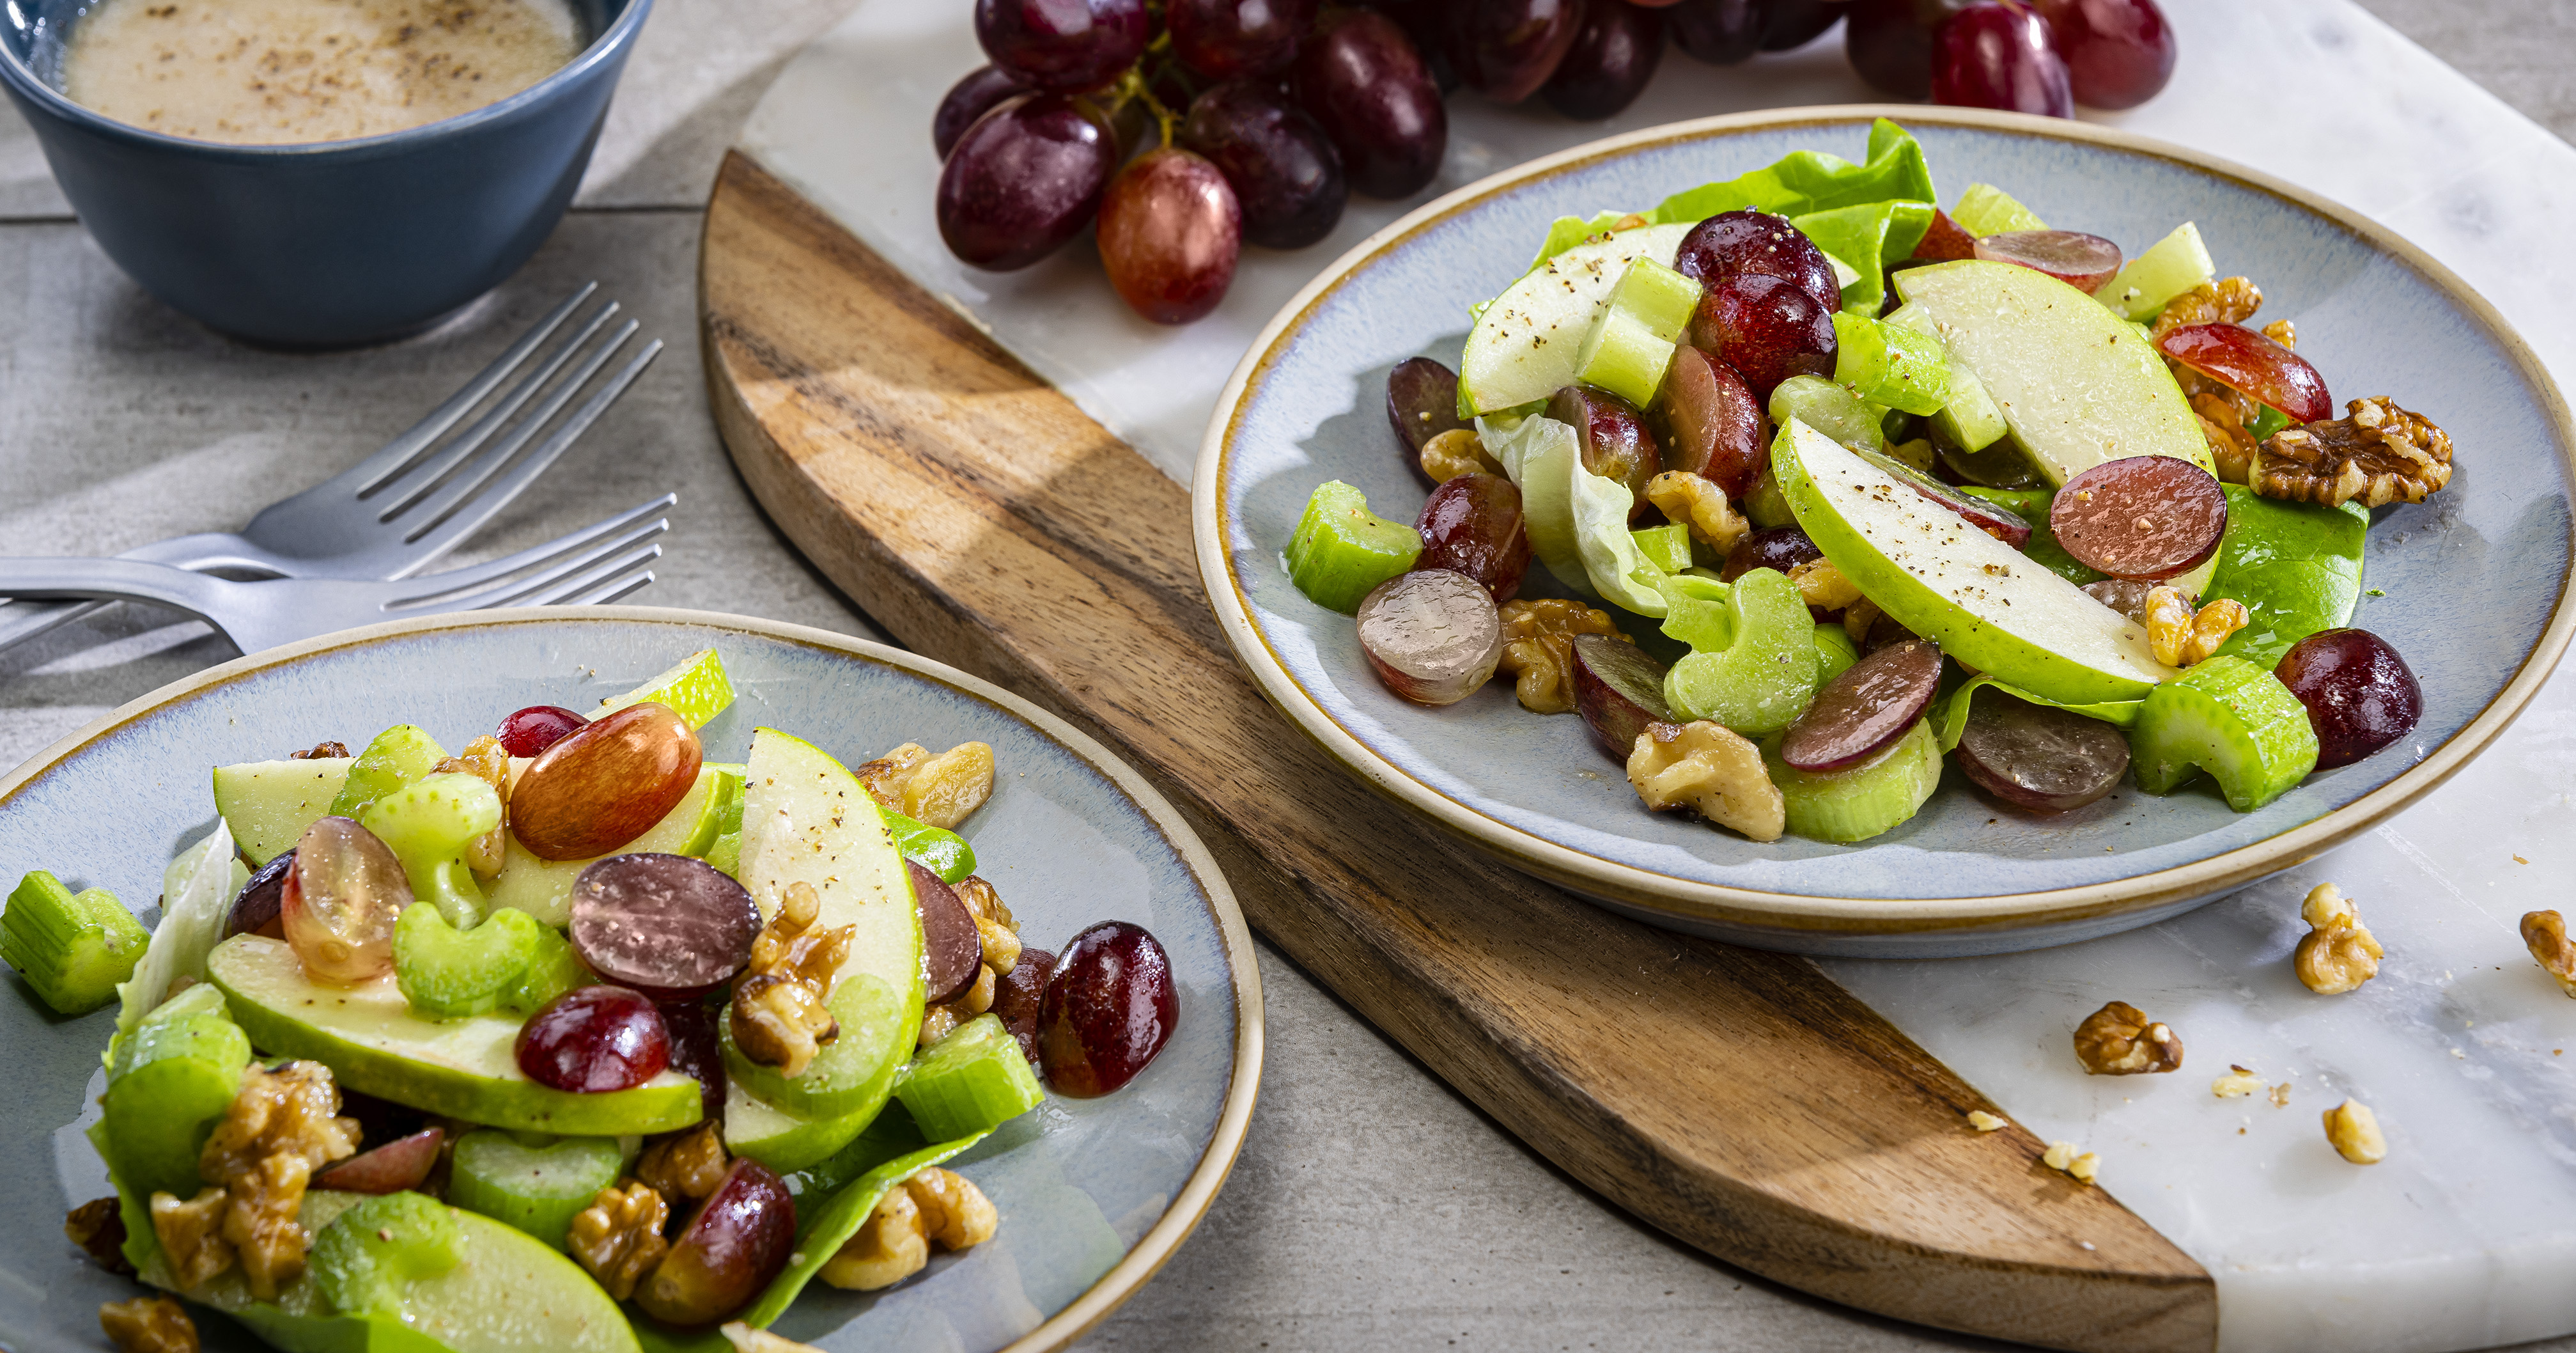 Waldorf Salad with Apples, Grapes in Vinaigrette